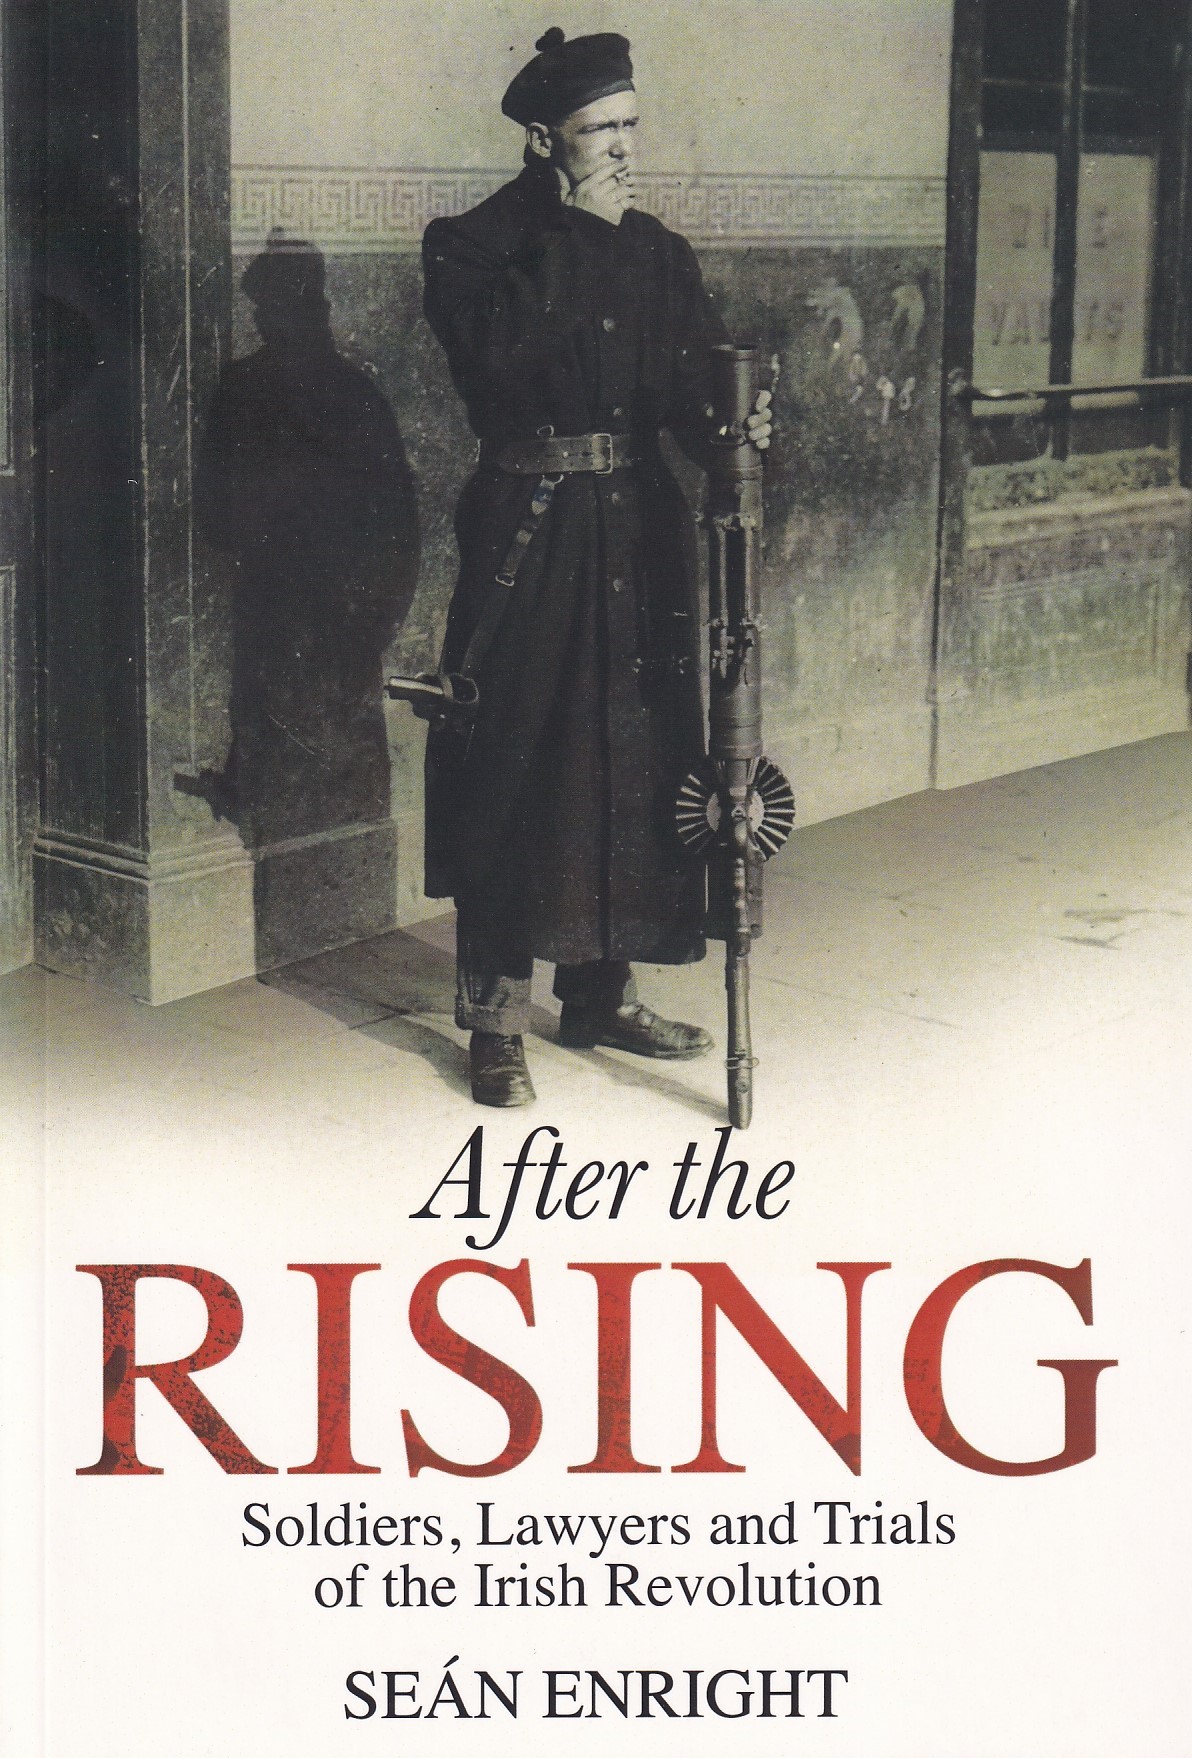 After the Rising: Soldiers, Lawyers and Trials of the Irish Revolution by Seán Enright